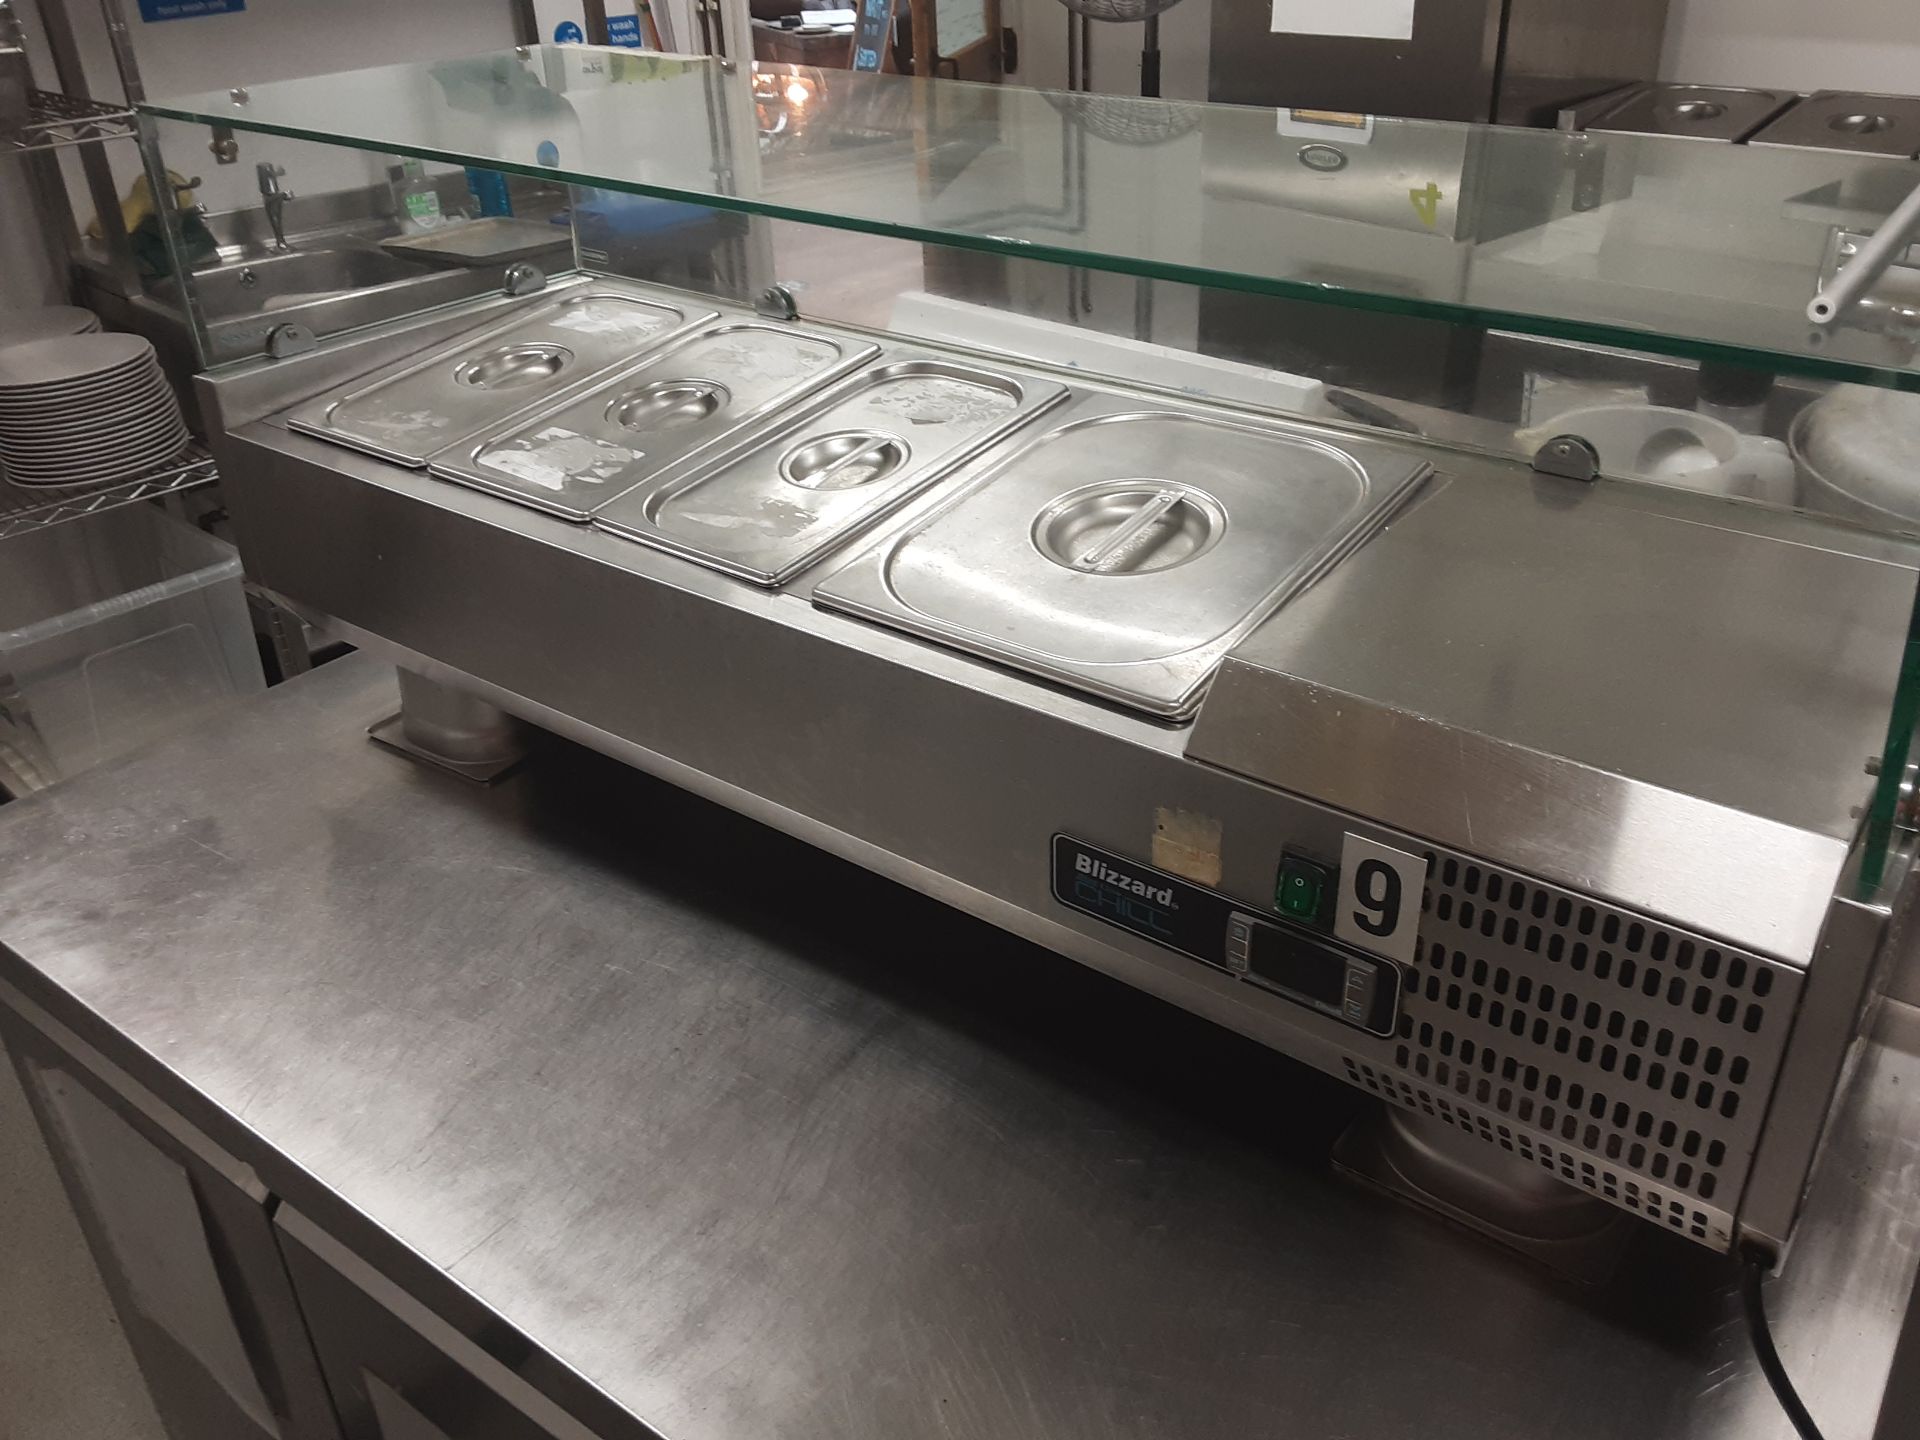 Blizzard TOP1200CR Refrigerated Preparation Top serial No 3AA3AR17223100017 Manufactured 08/2017